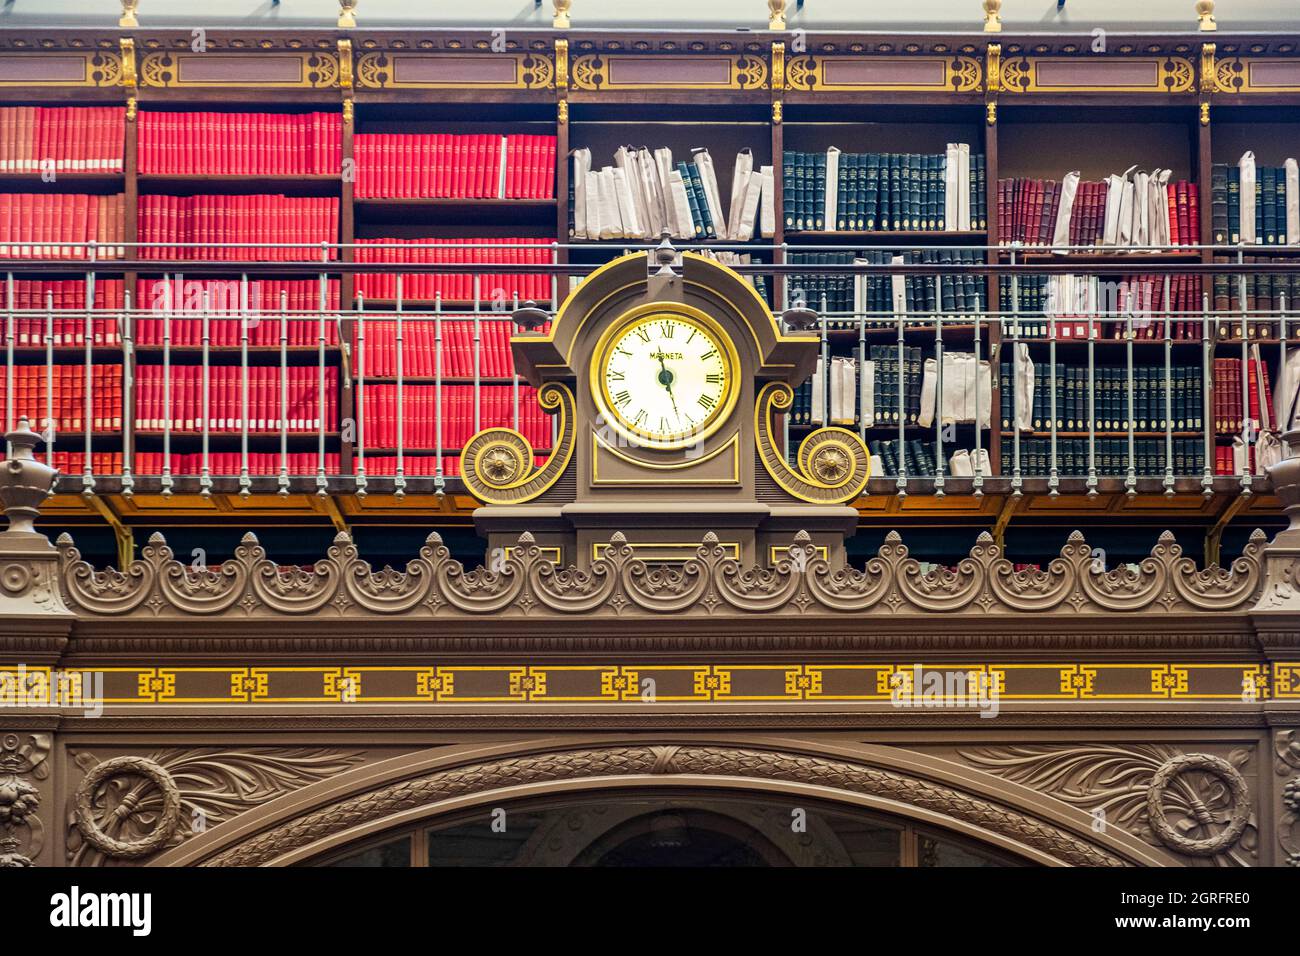 France, Paris, National Institute of Art History (INHA), Richelieu library, Labrouste room Stock Photo